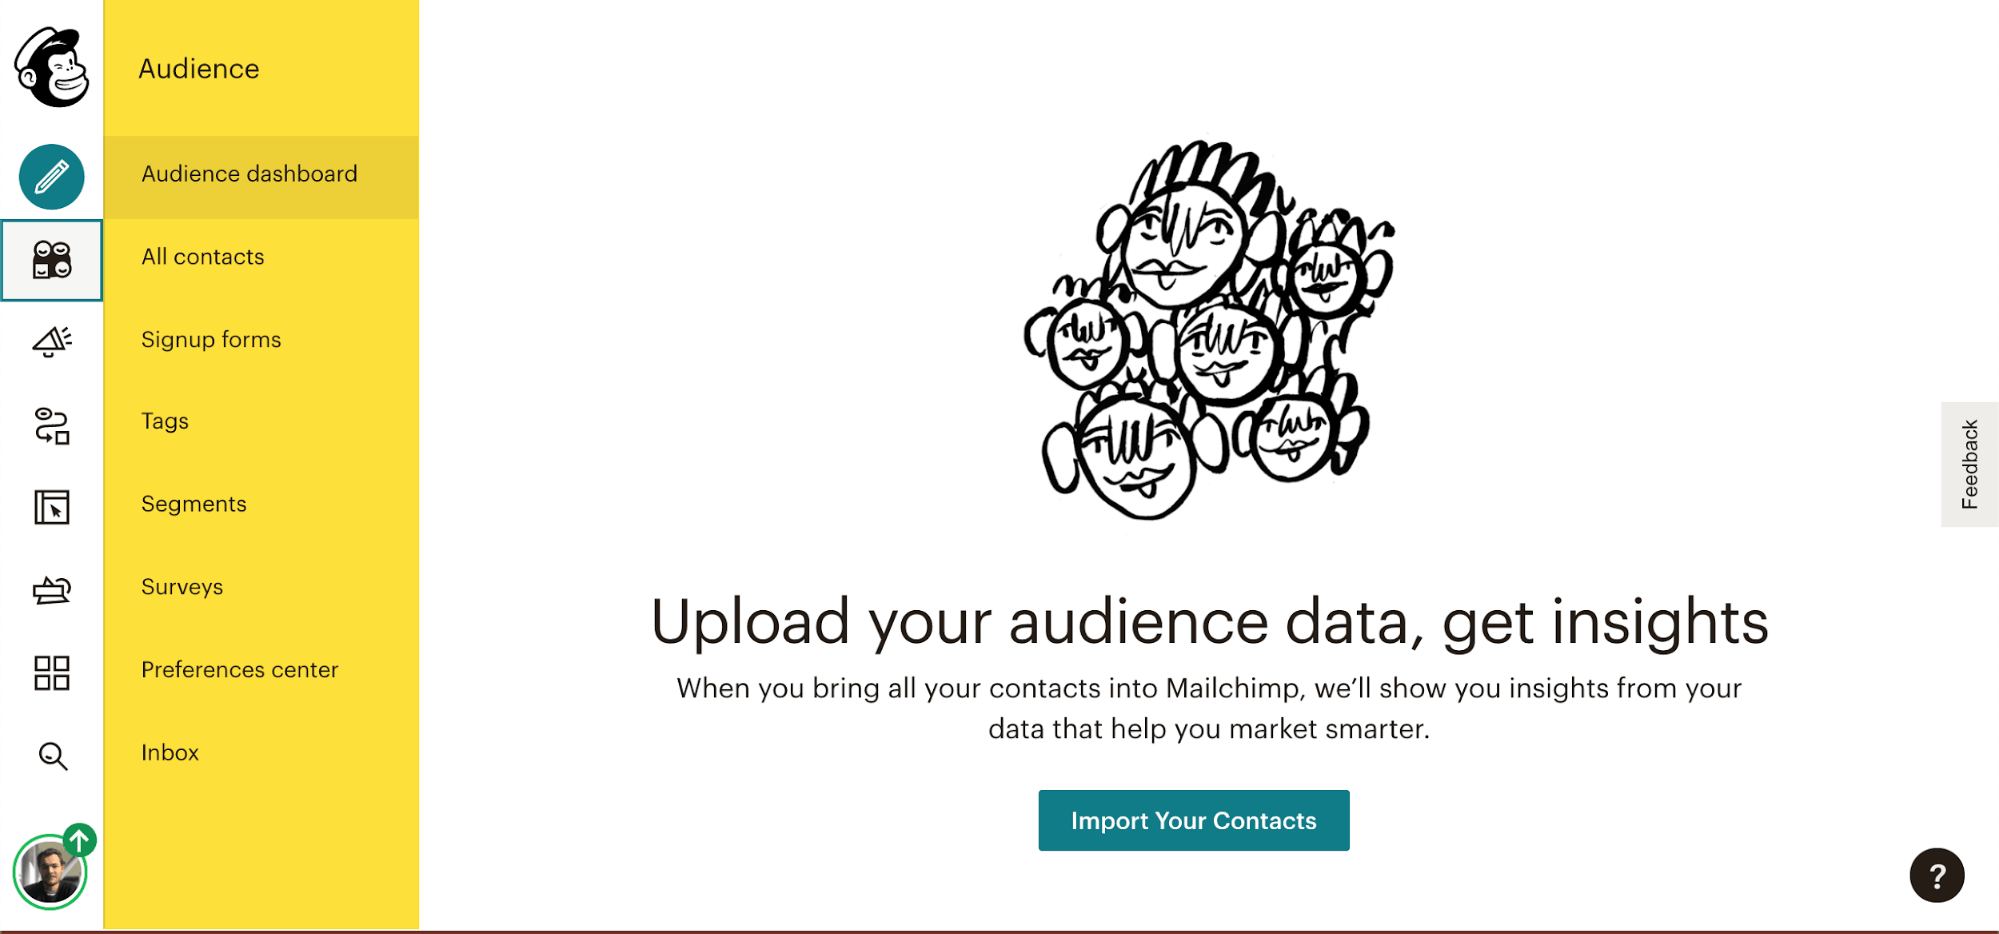 Mailchimp core features - Audience Dashboard